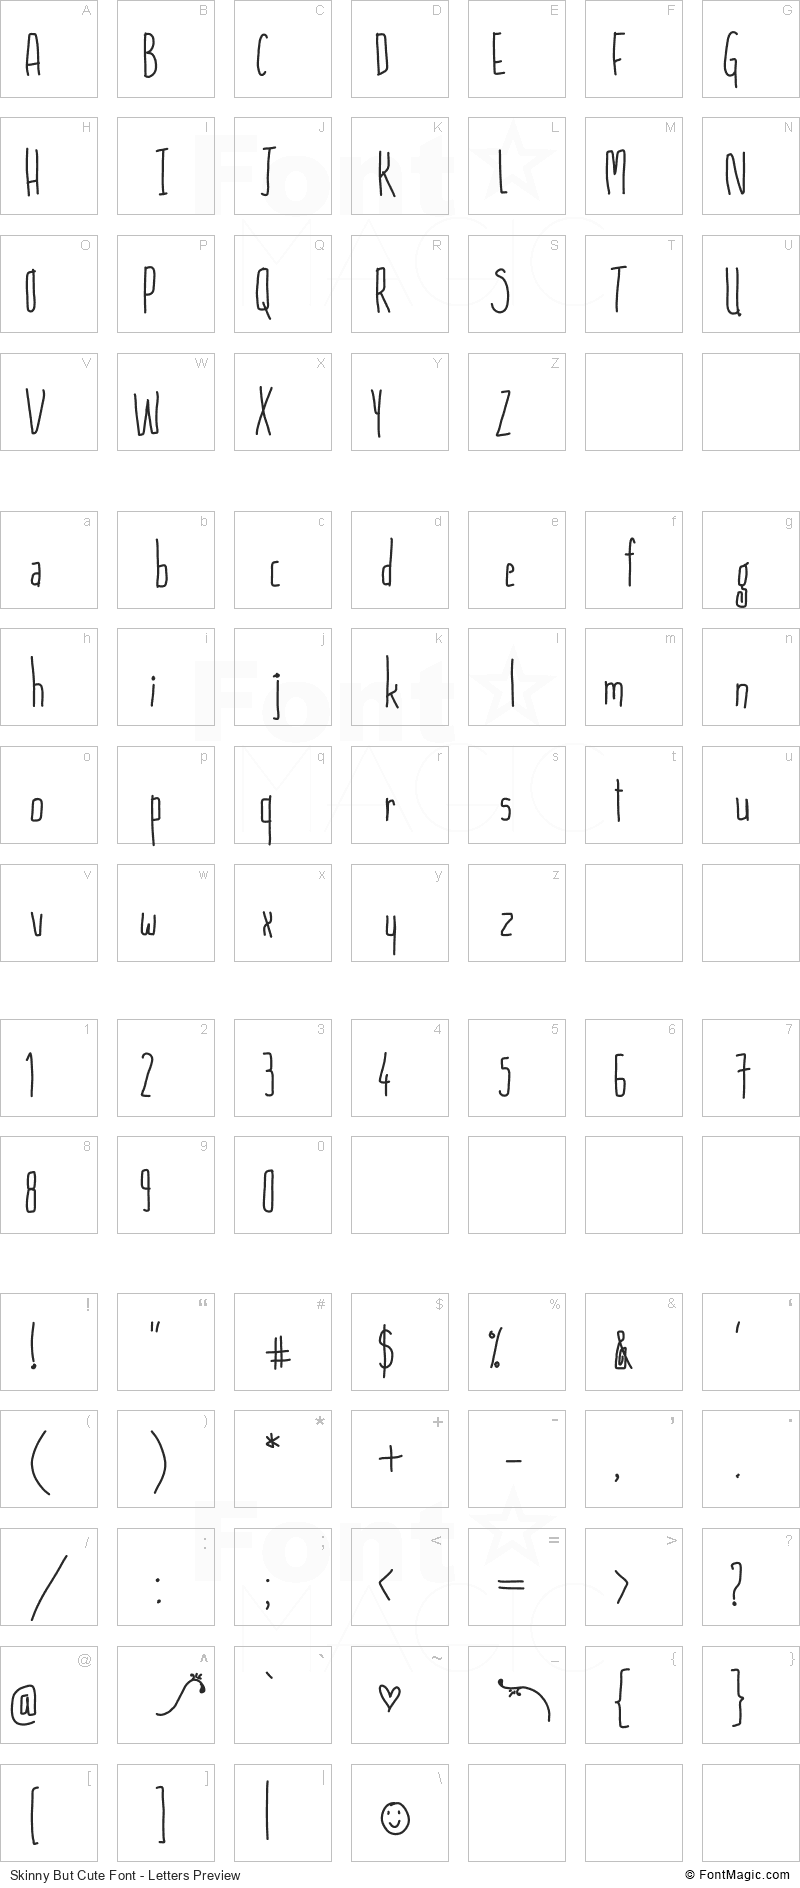 Skinny But Cute Font - All Latters Preview Chart